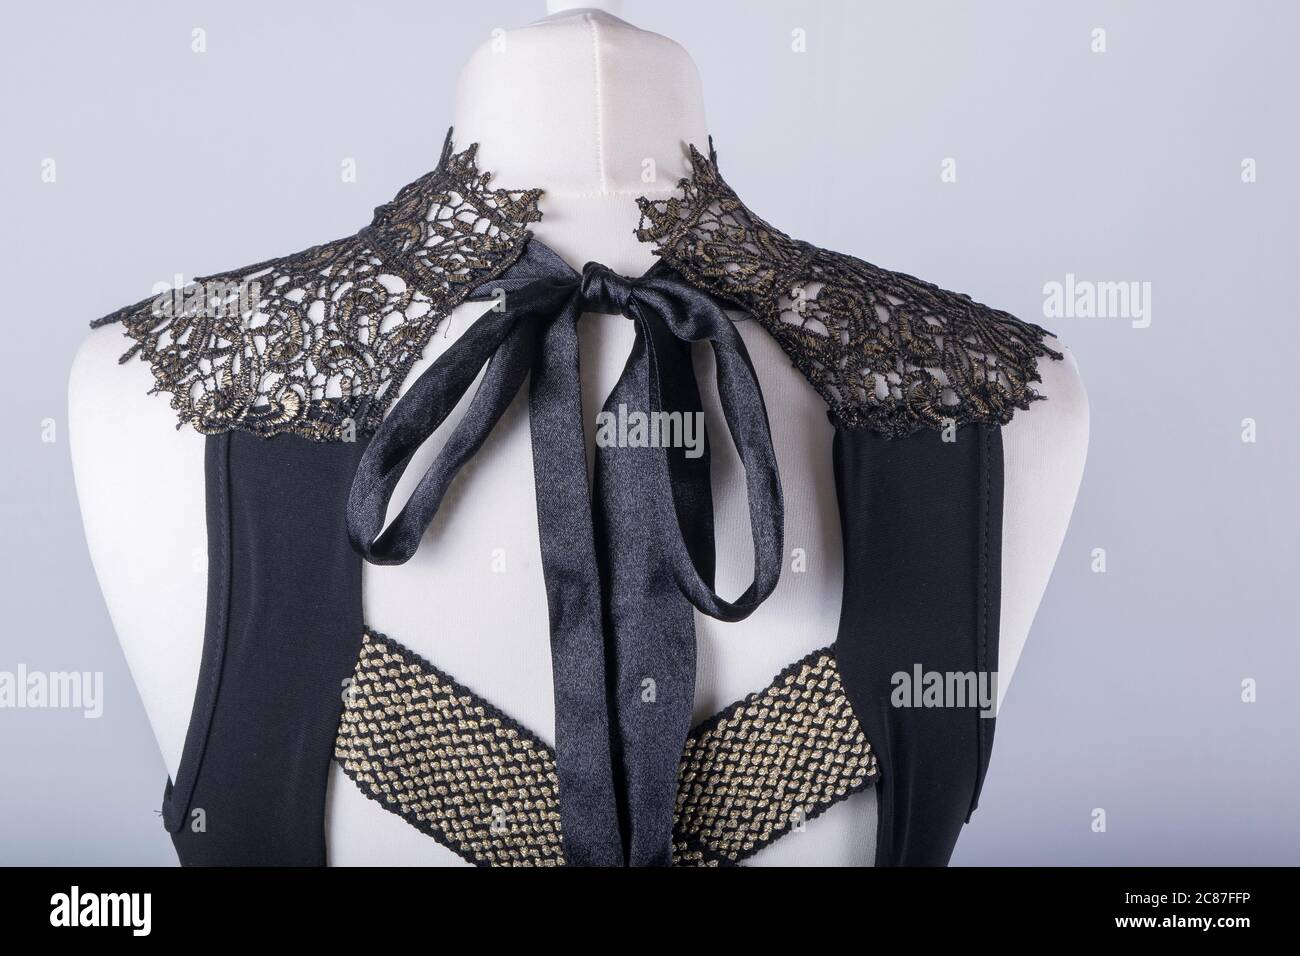 A Tailors Mannequin dressed in a Black and Gold Lace Dress Stock Photo